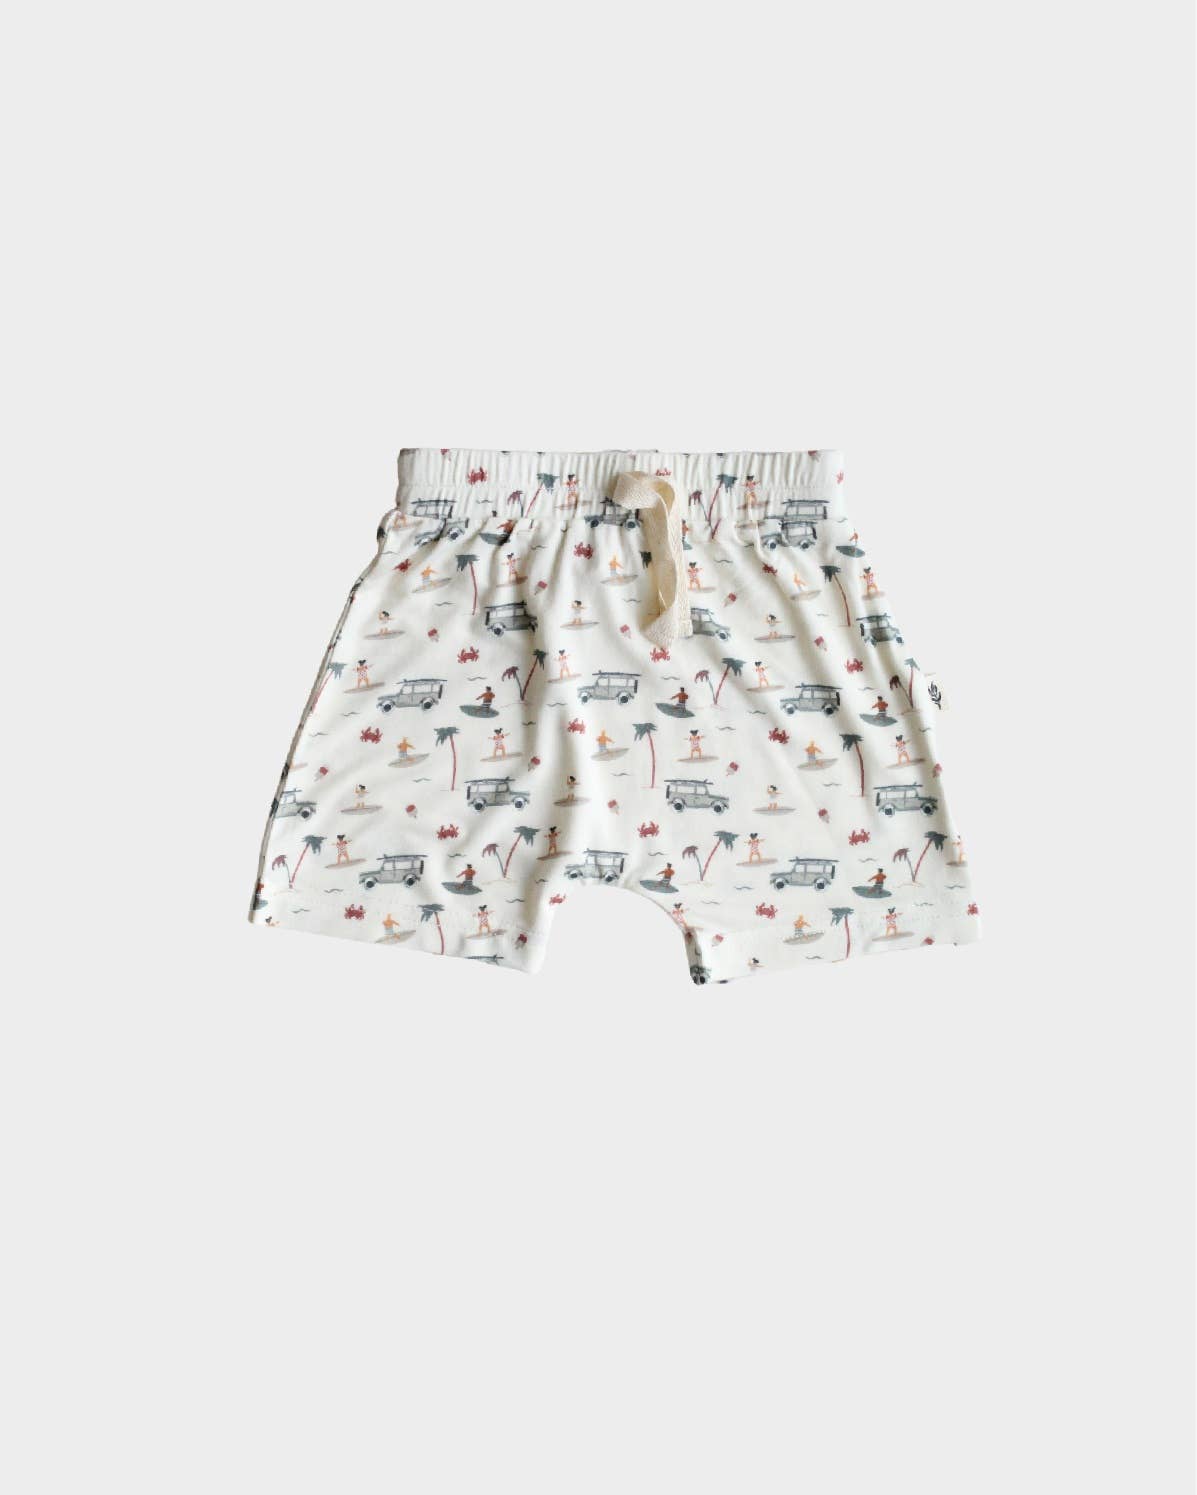 babysprouts clothing company - S23 D2: Baby Boy's Harem Shorts in Surf - kennethodaniel